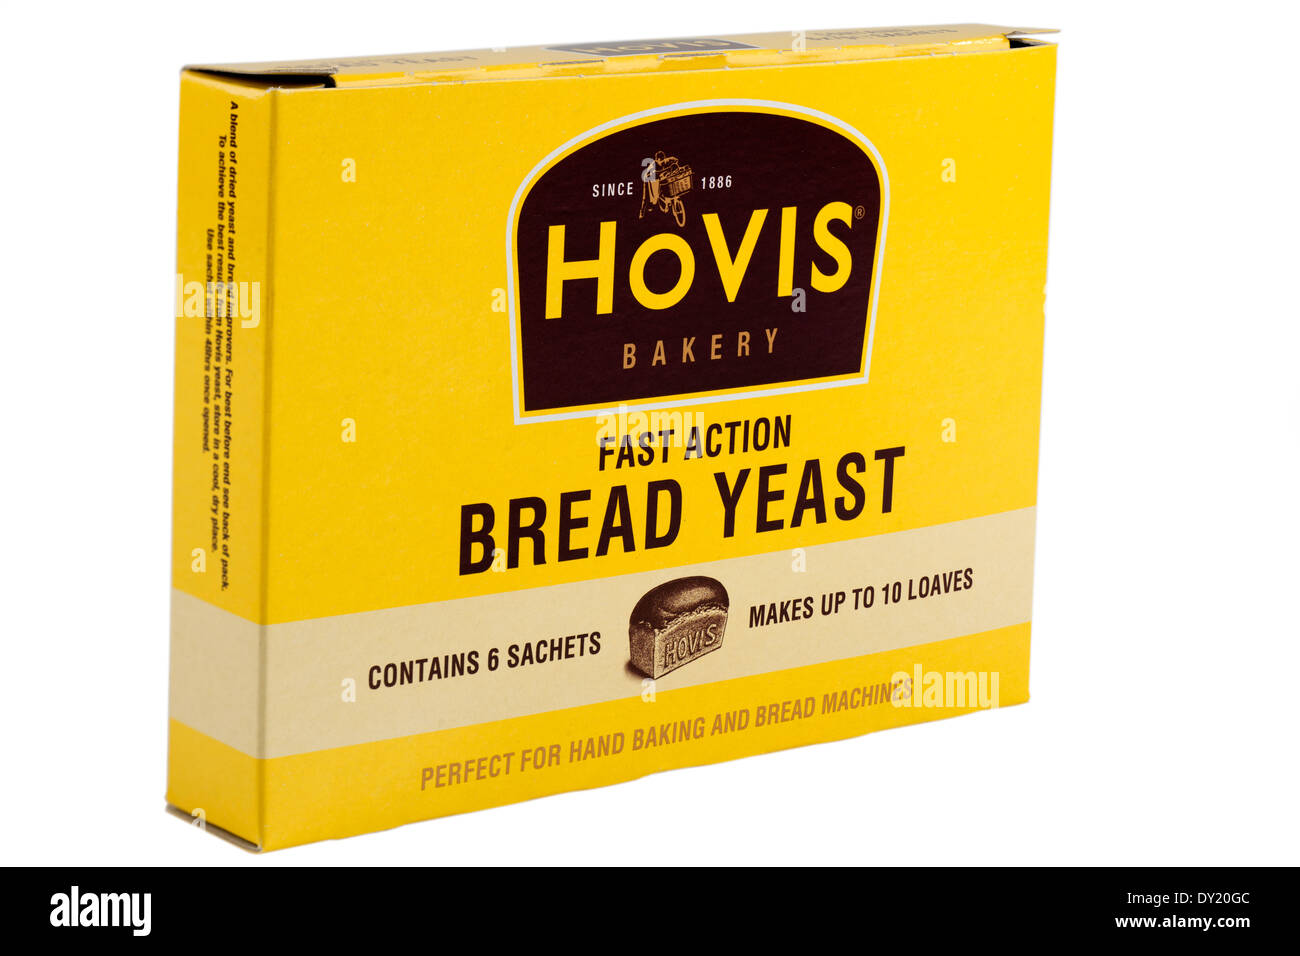 Box of 6 sachets of Hovis fast action bread yeast Stock Photo